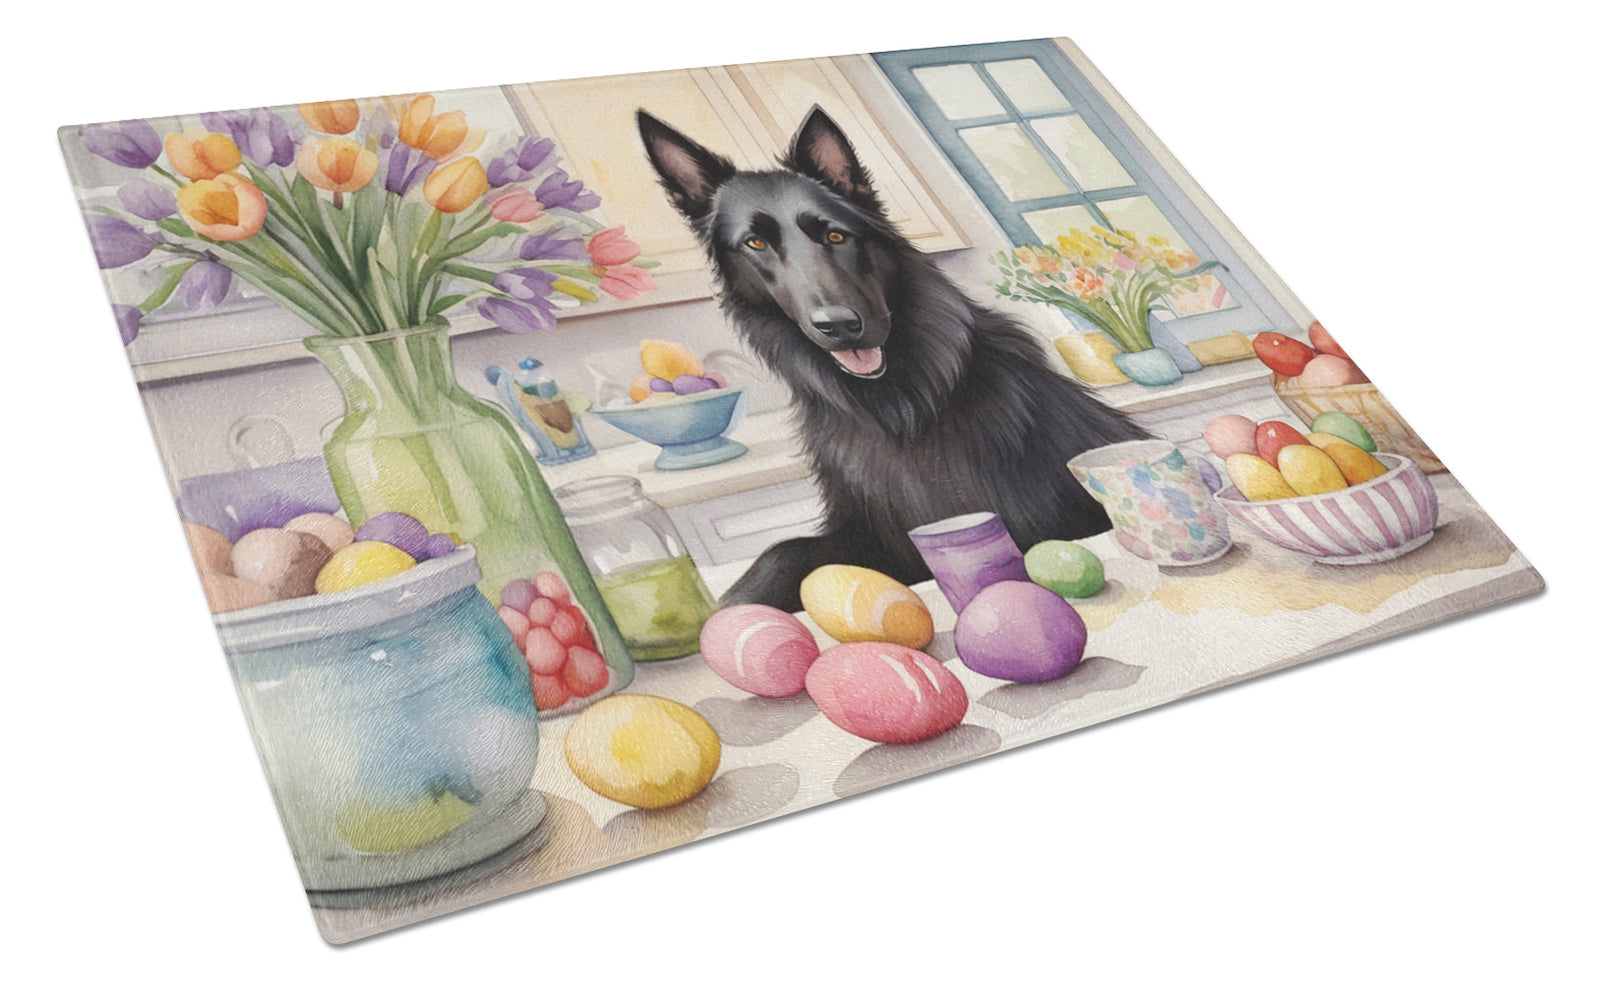 Buy this Decorating Easter Belgian Sheepdog Glass Cutting Board